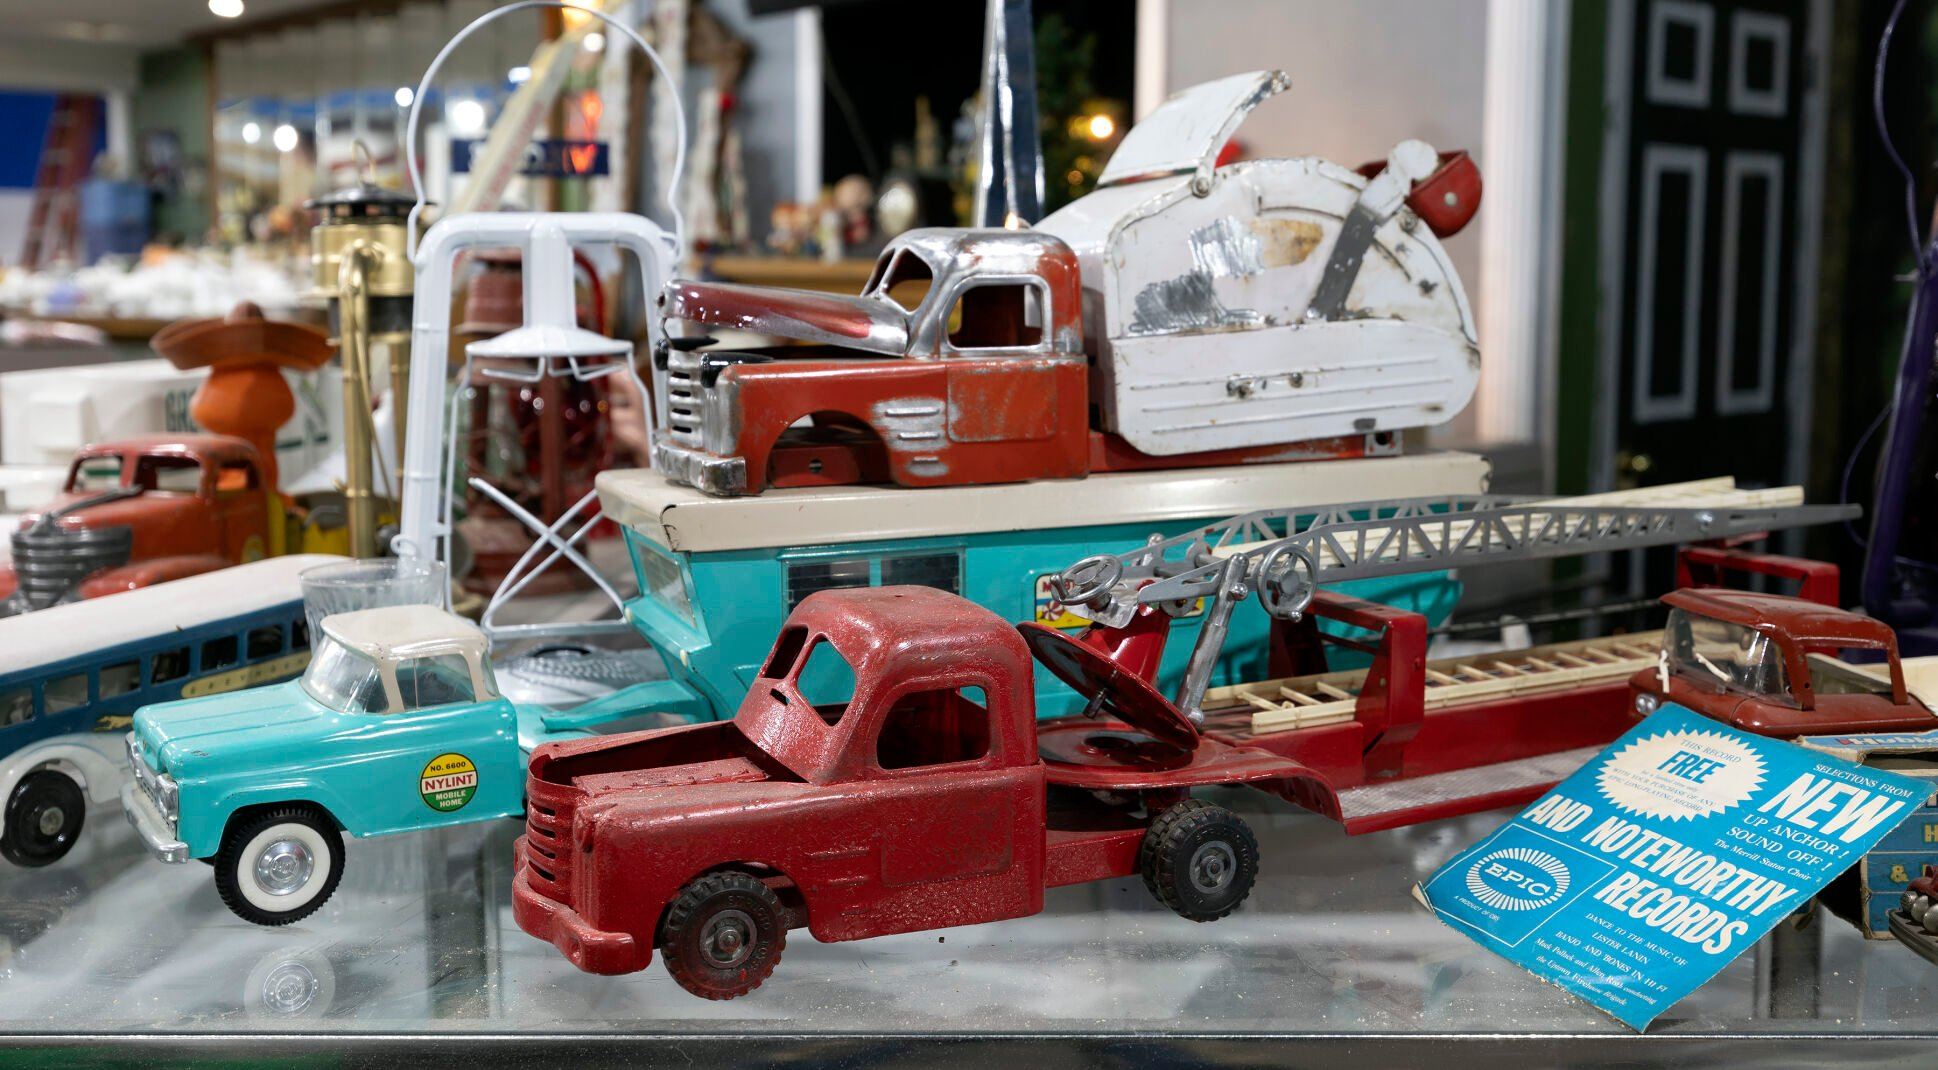 Antique toys are among the items for sale at Illinois Treasure Co. in East Dubuque, Ill., on Monday.    PHOTO CREDIT: Stephen Gassman